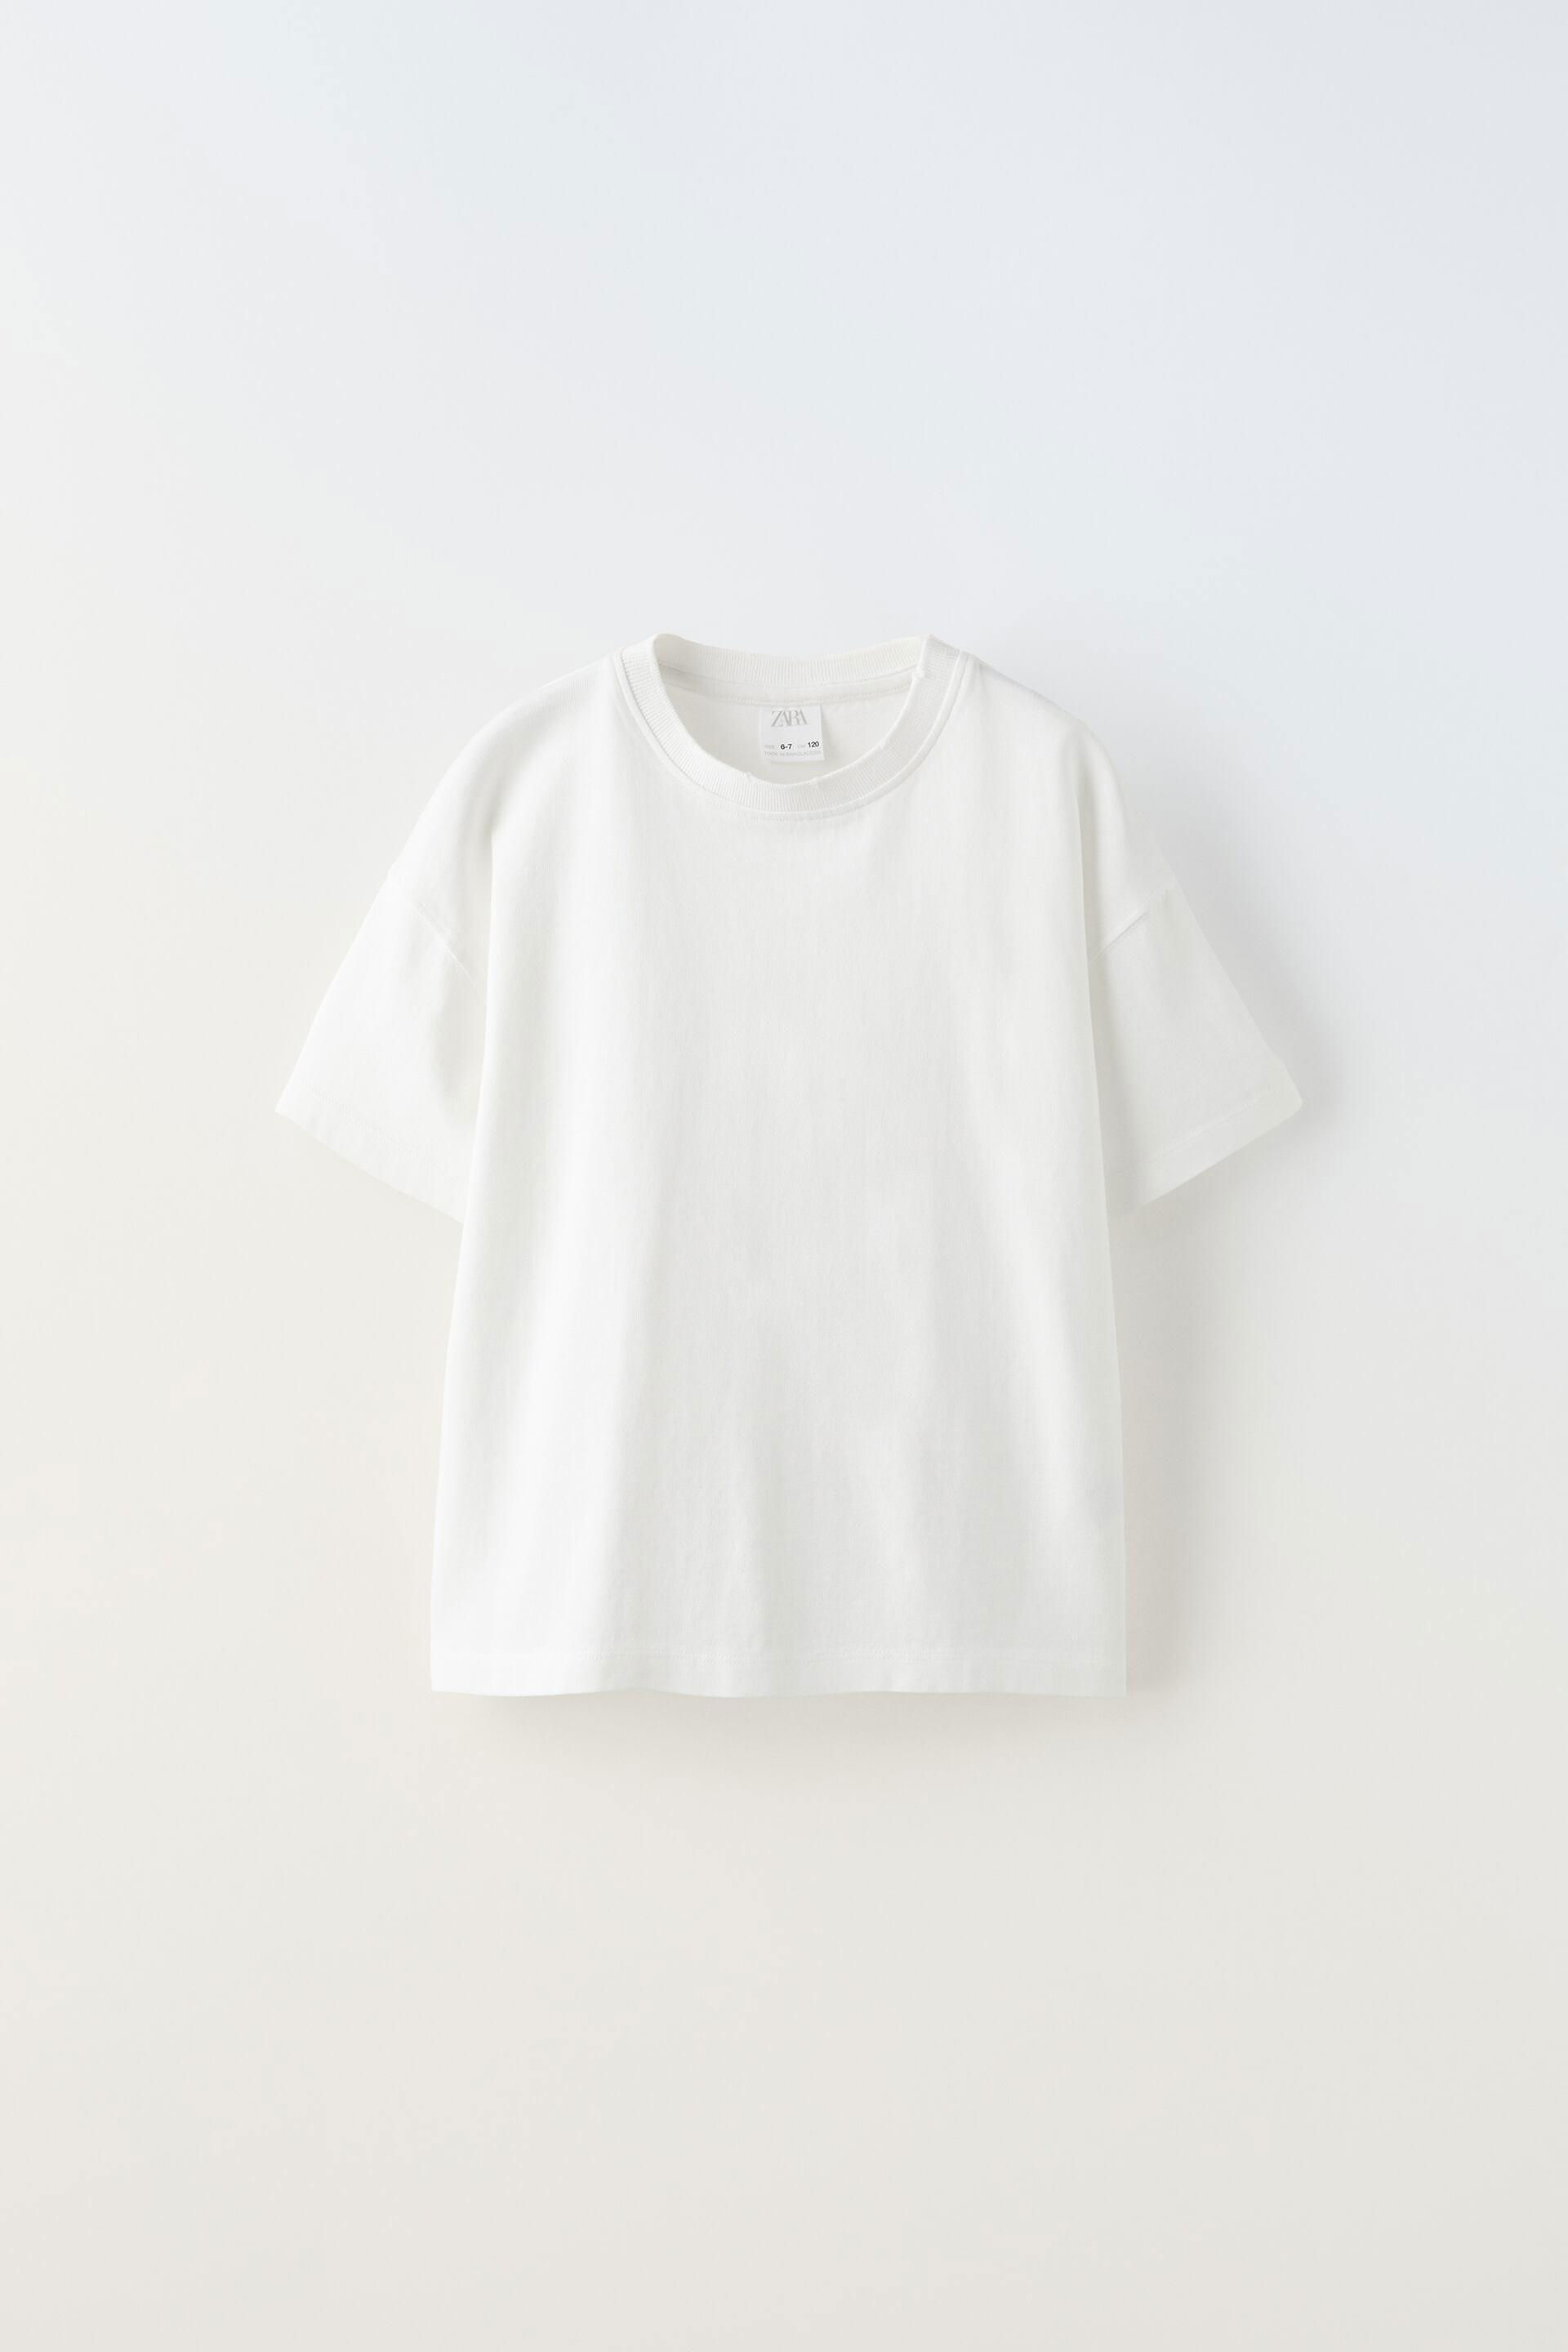 WASHED EFFECT HEAVY WEIGHT T-SHIRT by ZARA